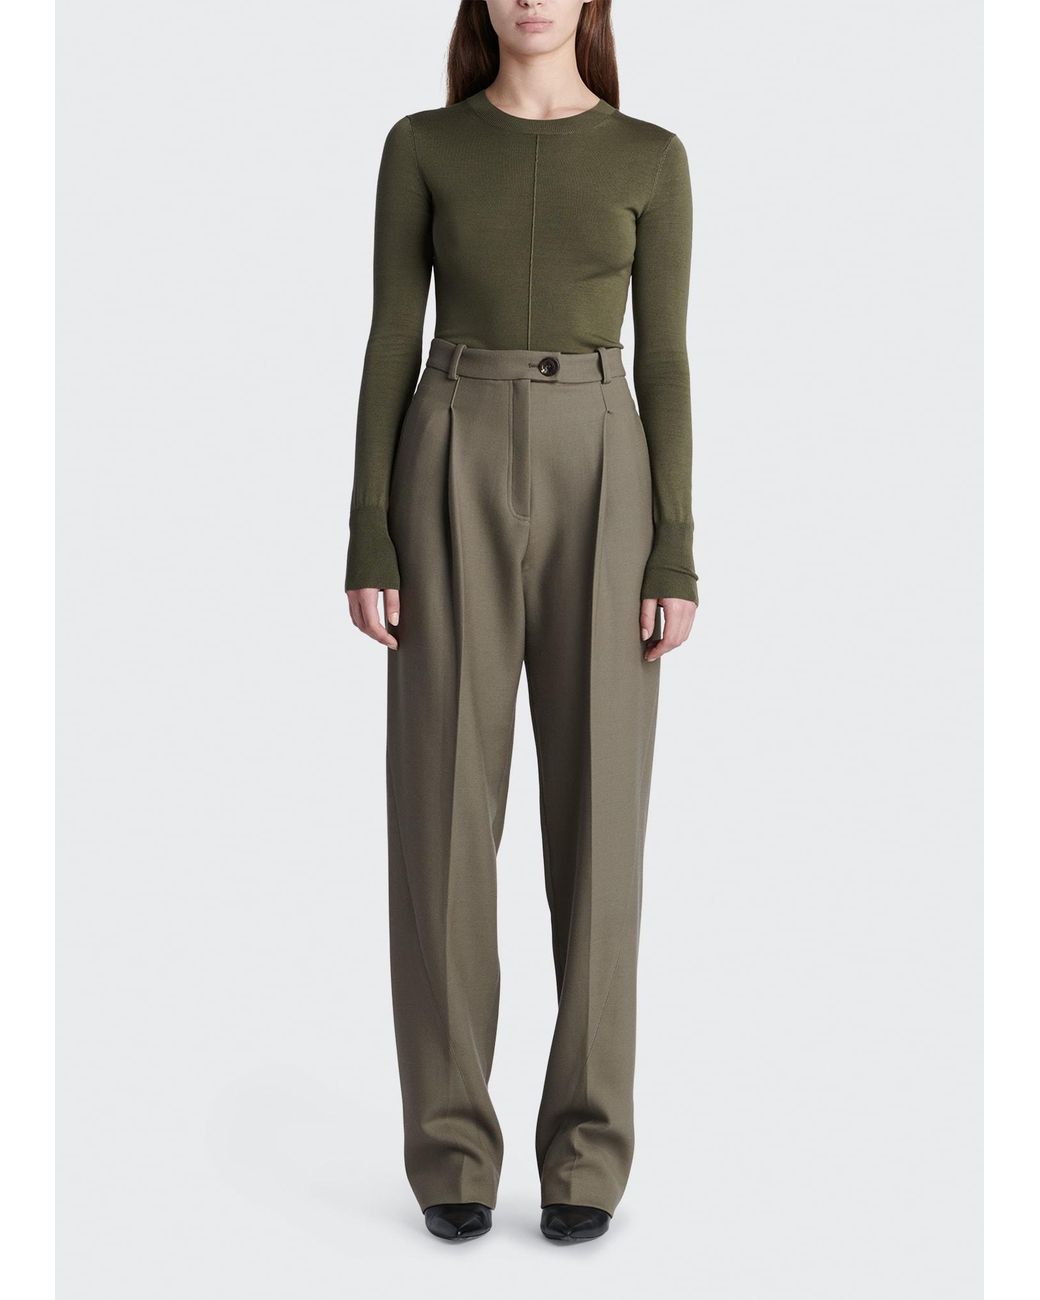 Peter Do Twisted Seam Straight-leg Wool Pants in Green | Lyst